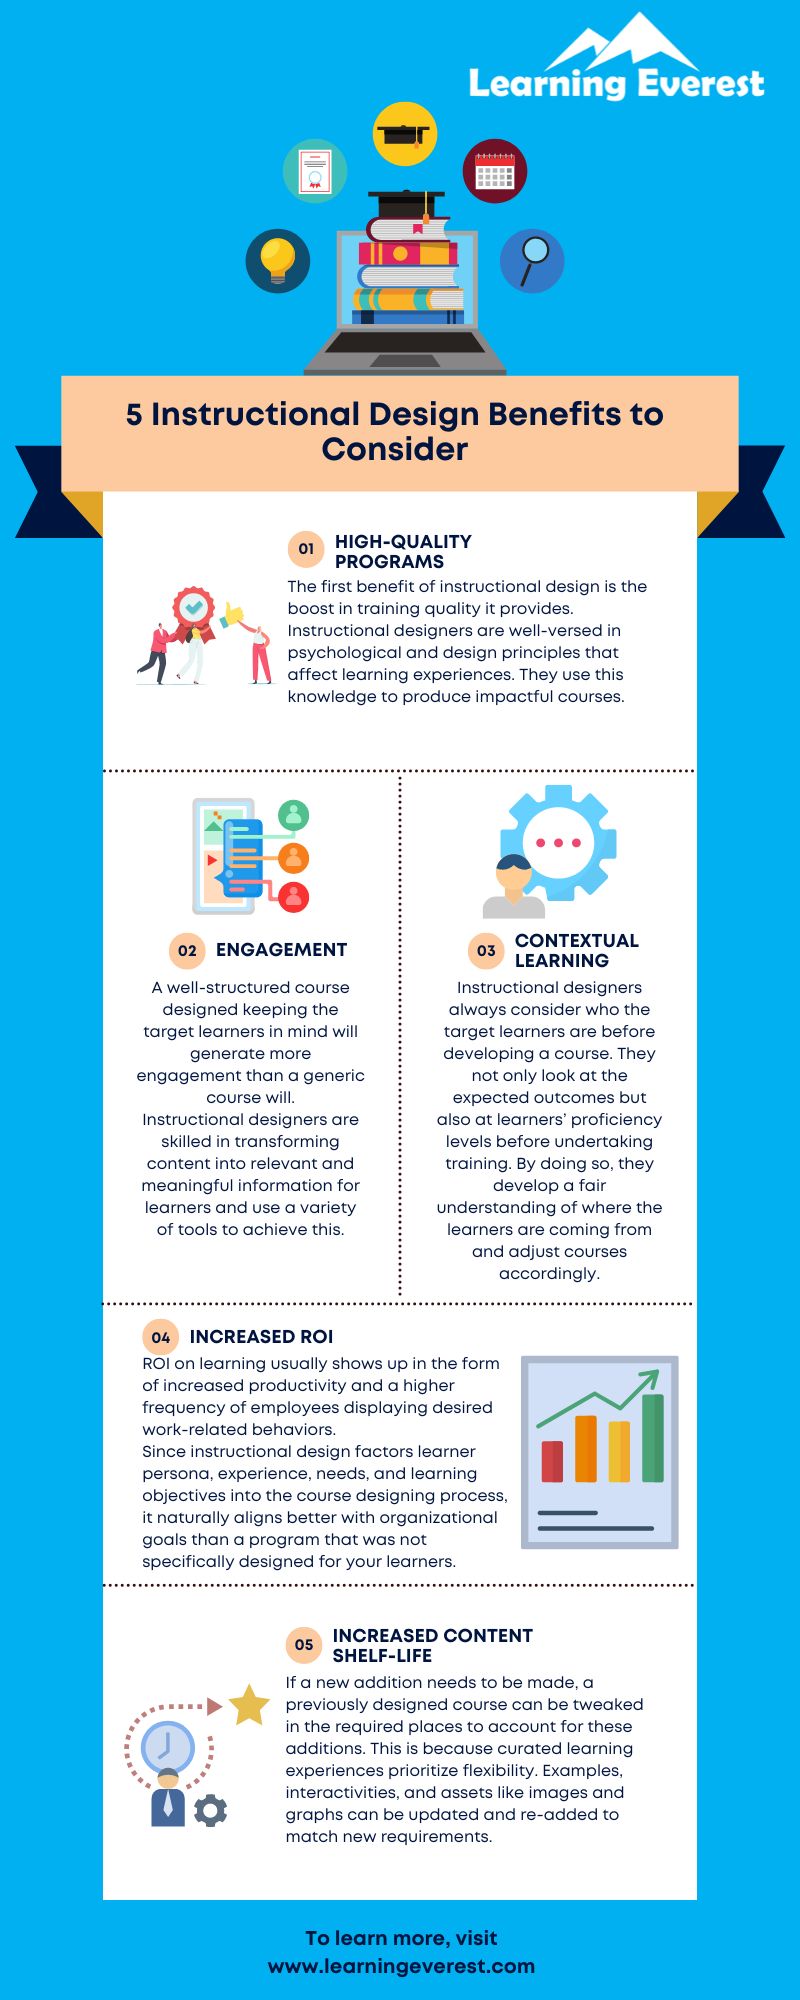 5 Instructional Design Benefits to Consider - Infographic